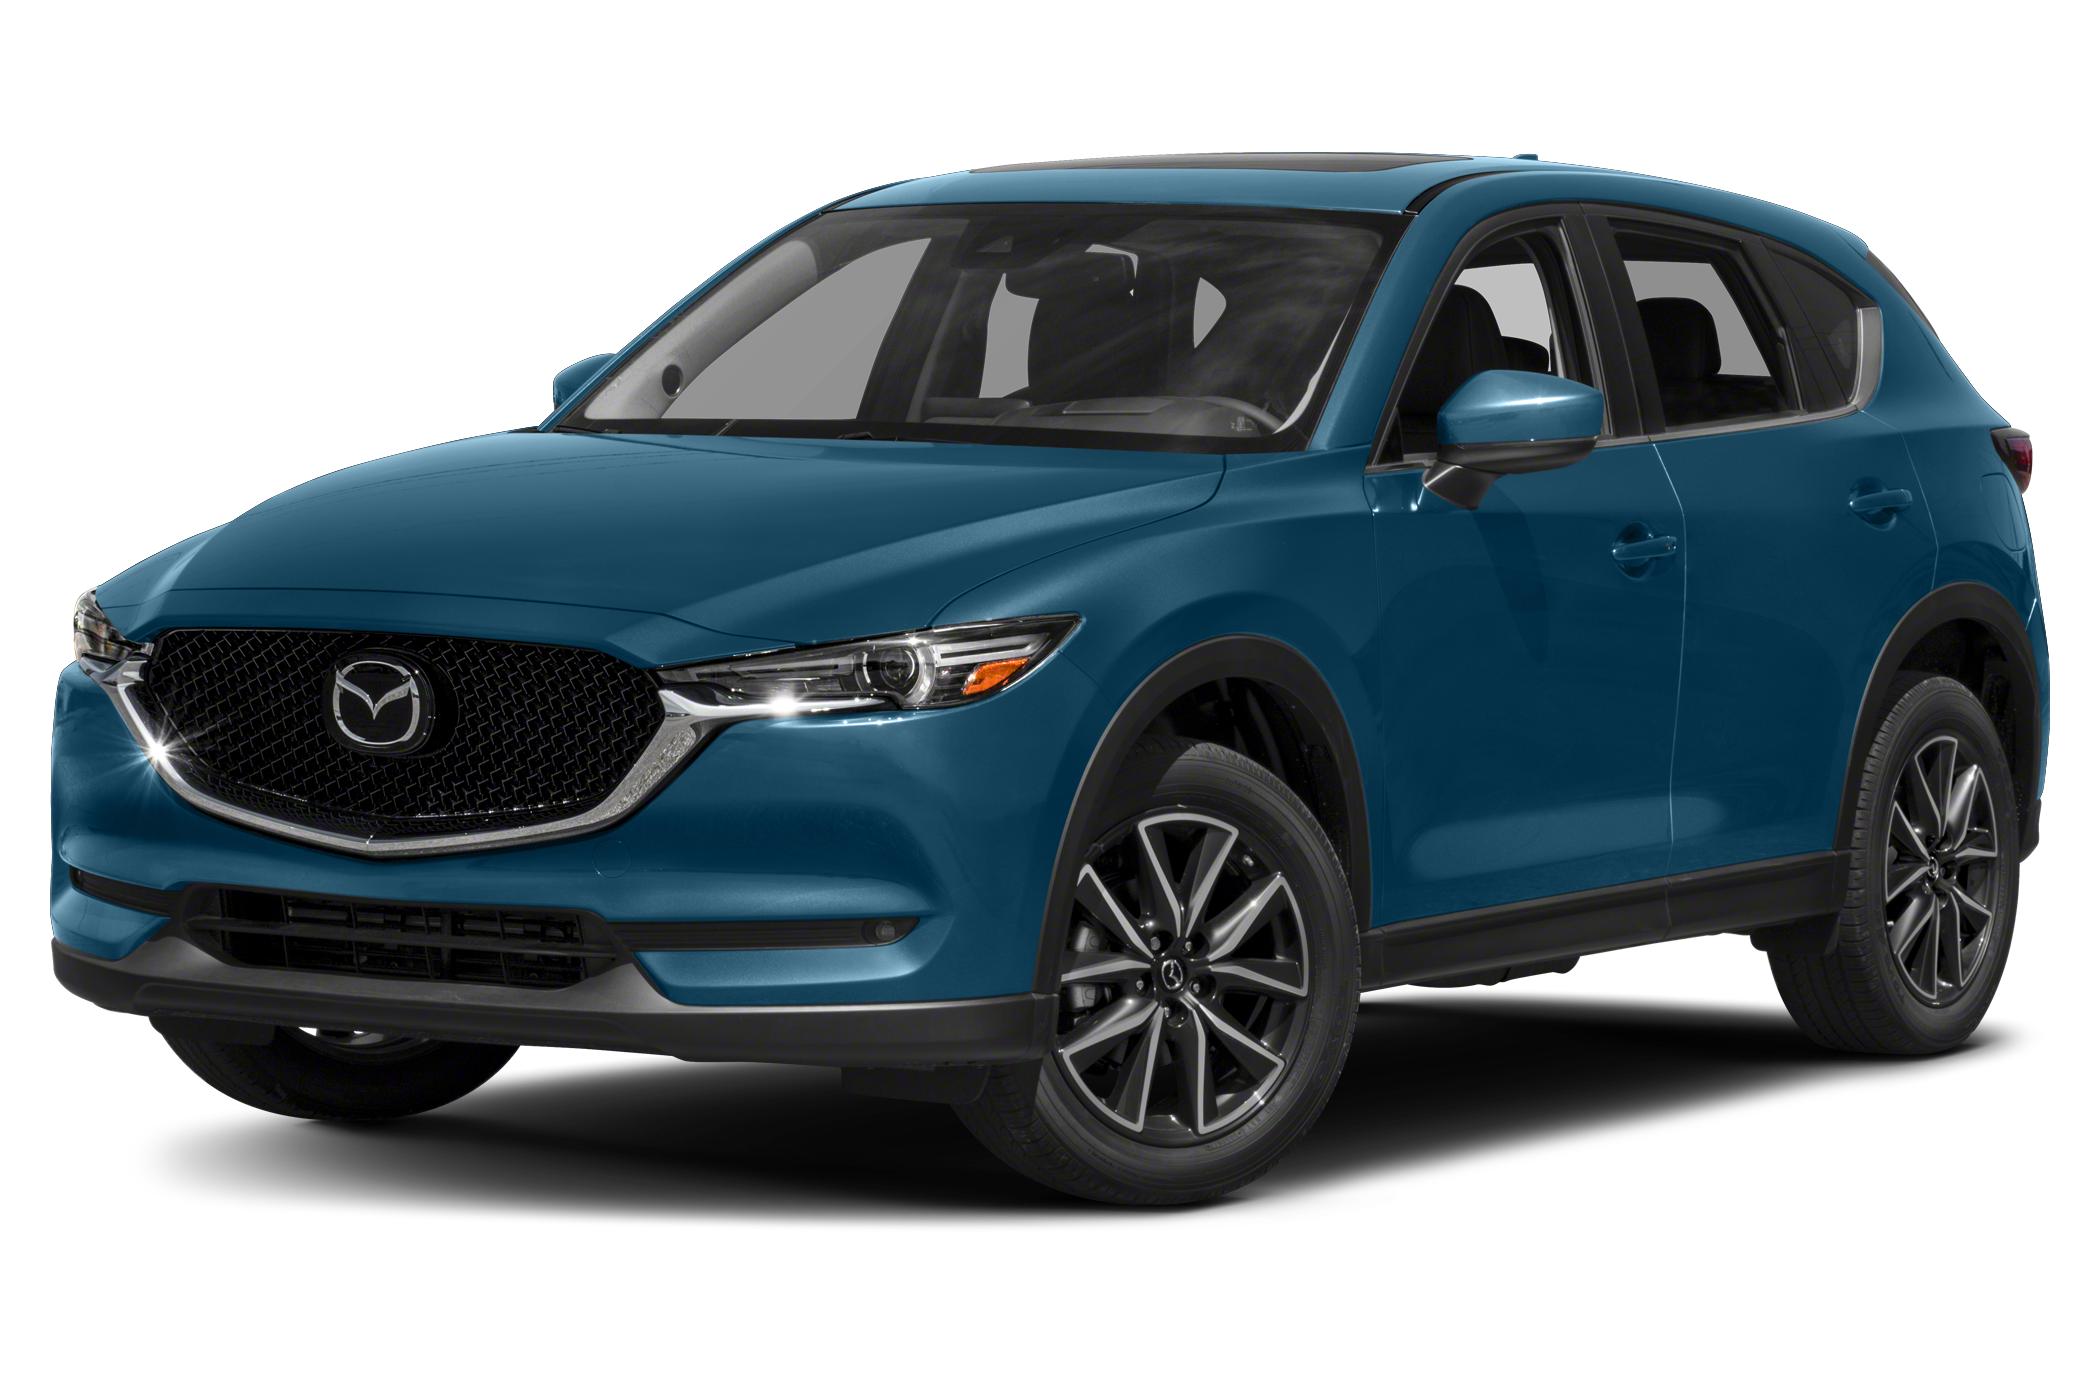 Used 2017 Mazda CX5 for Sale in Milwaukee, WI